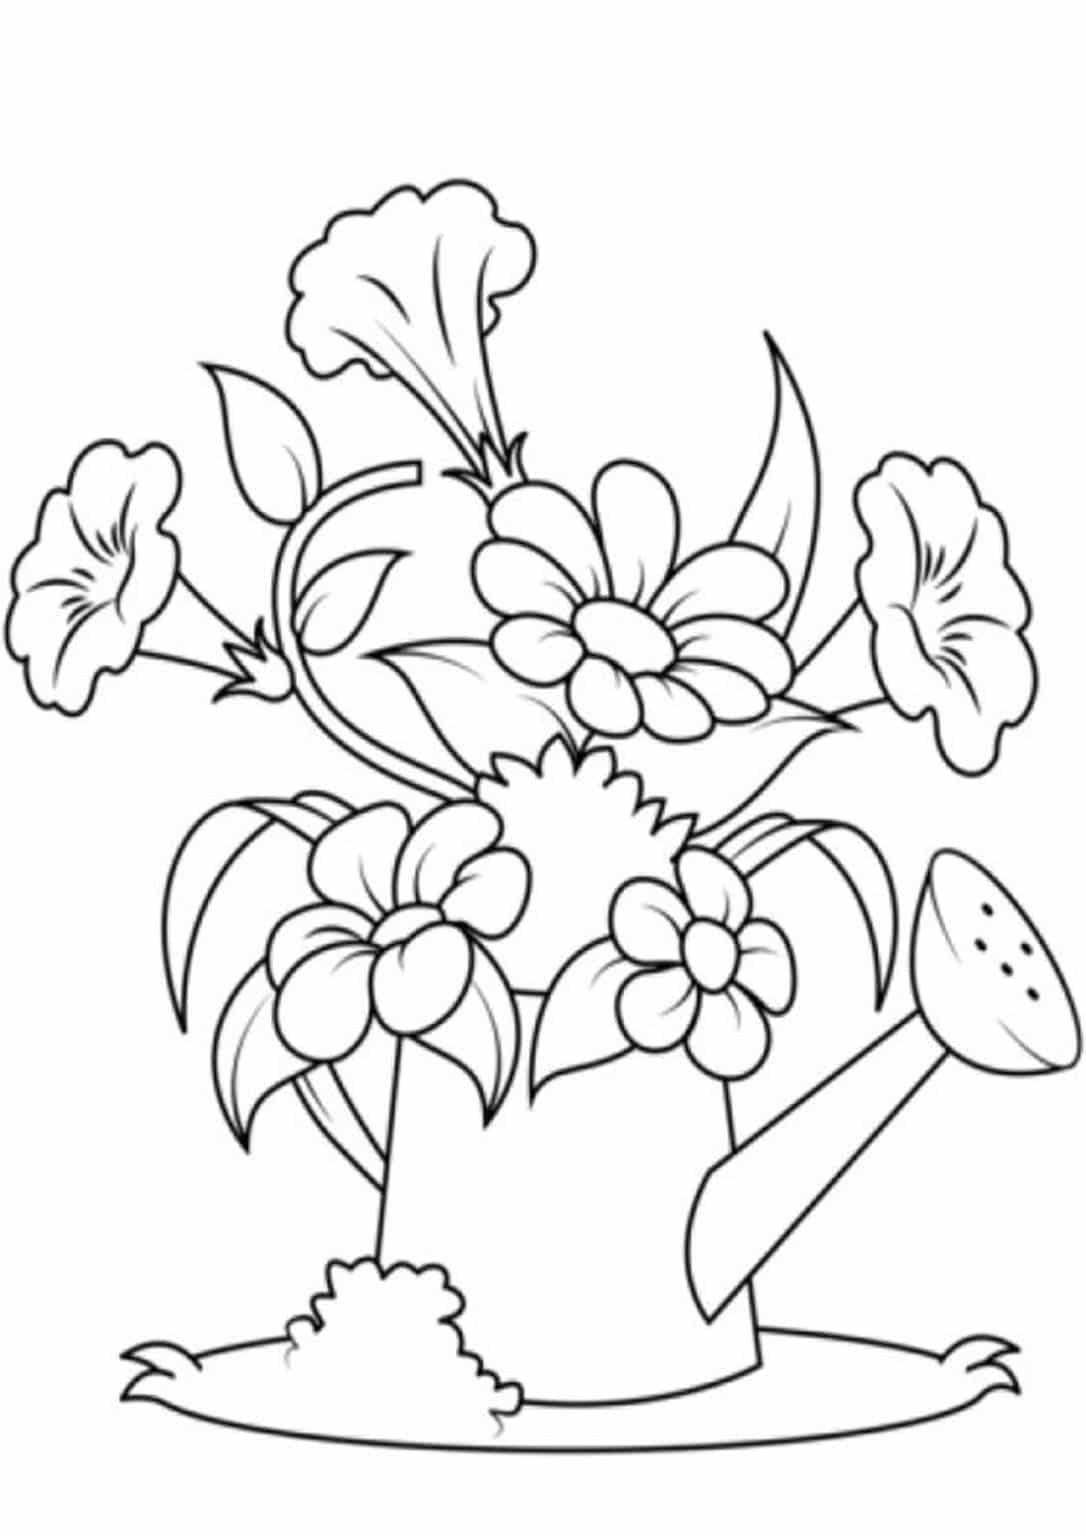 simple-flower-coloring-page-cute-flower-easy-flower-coloring-pages